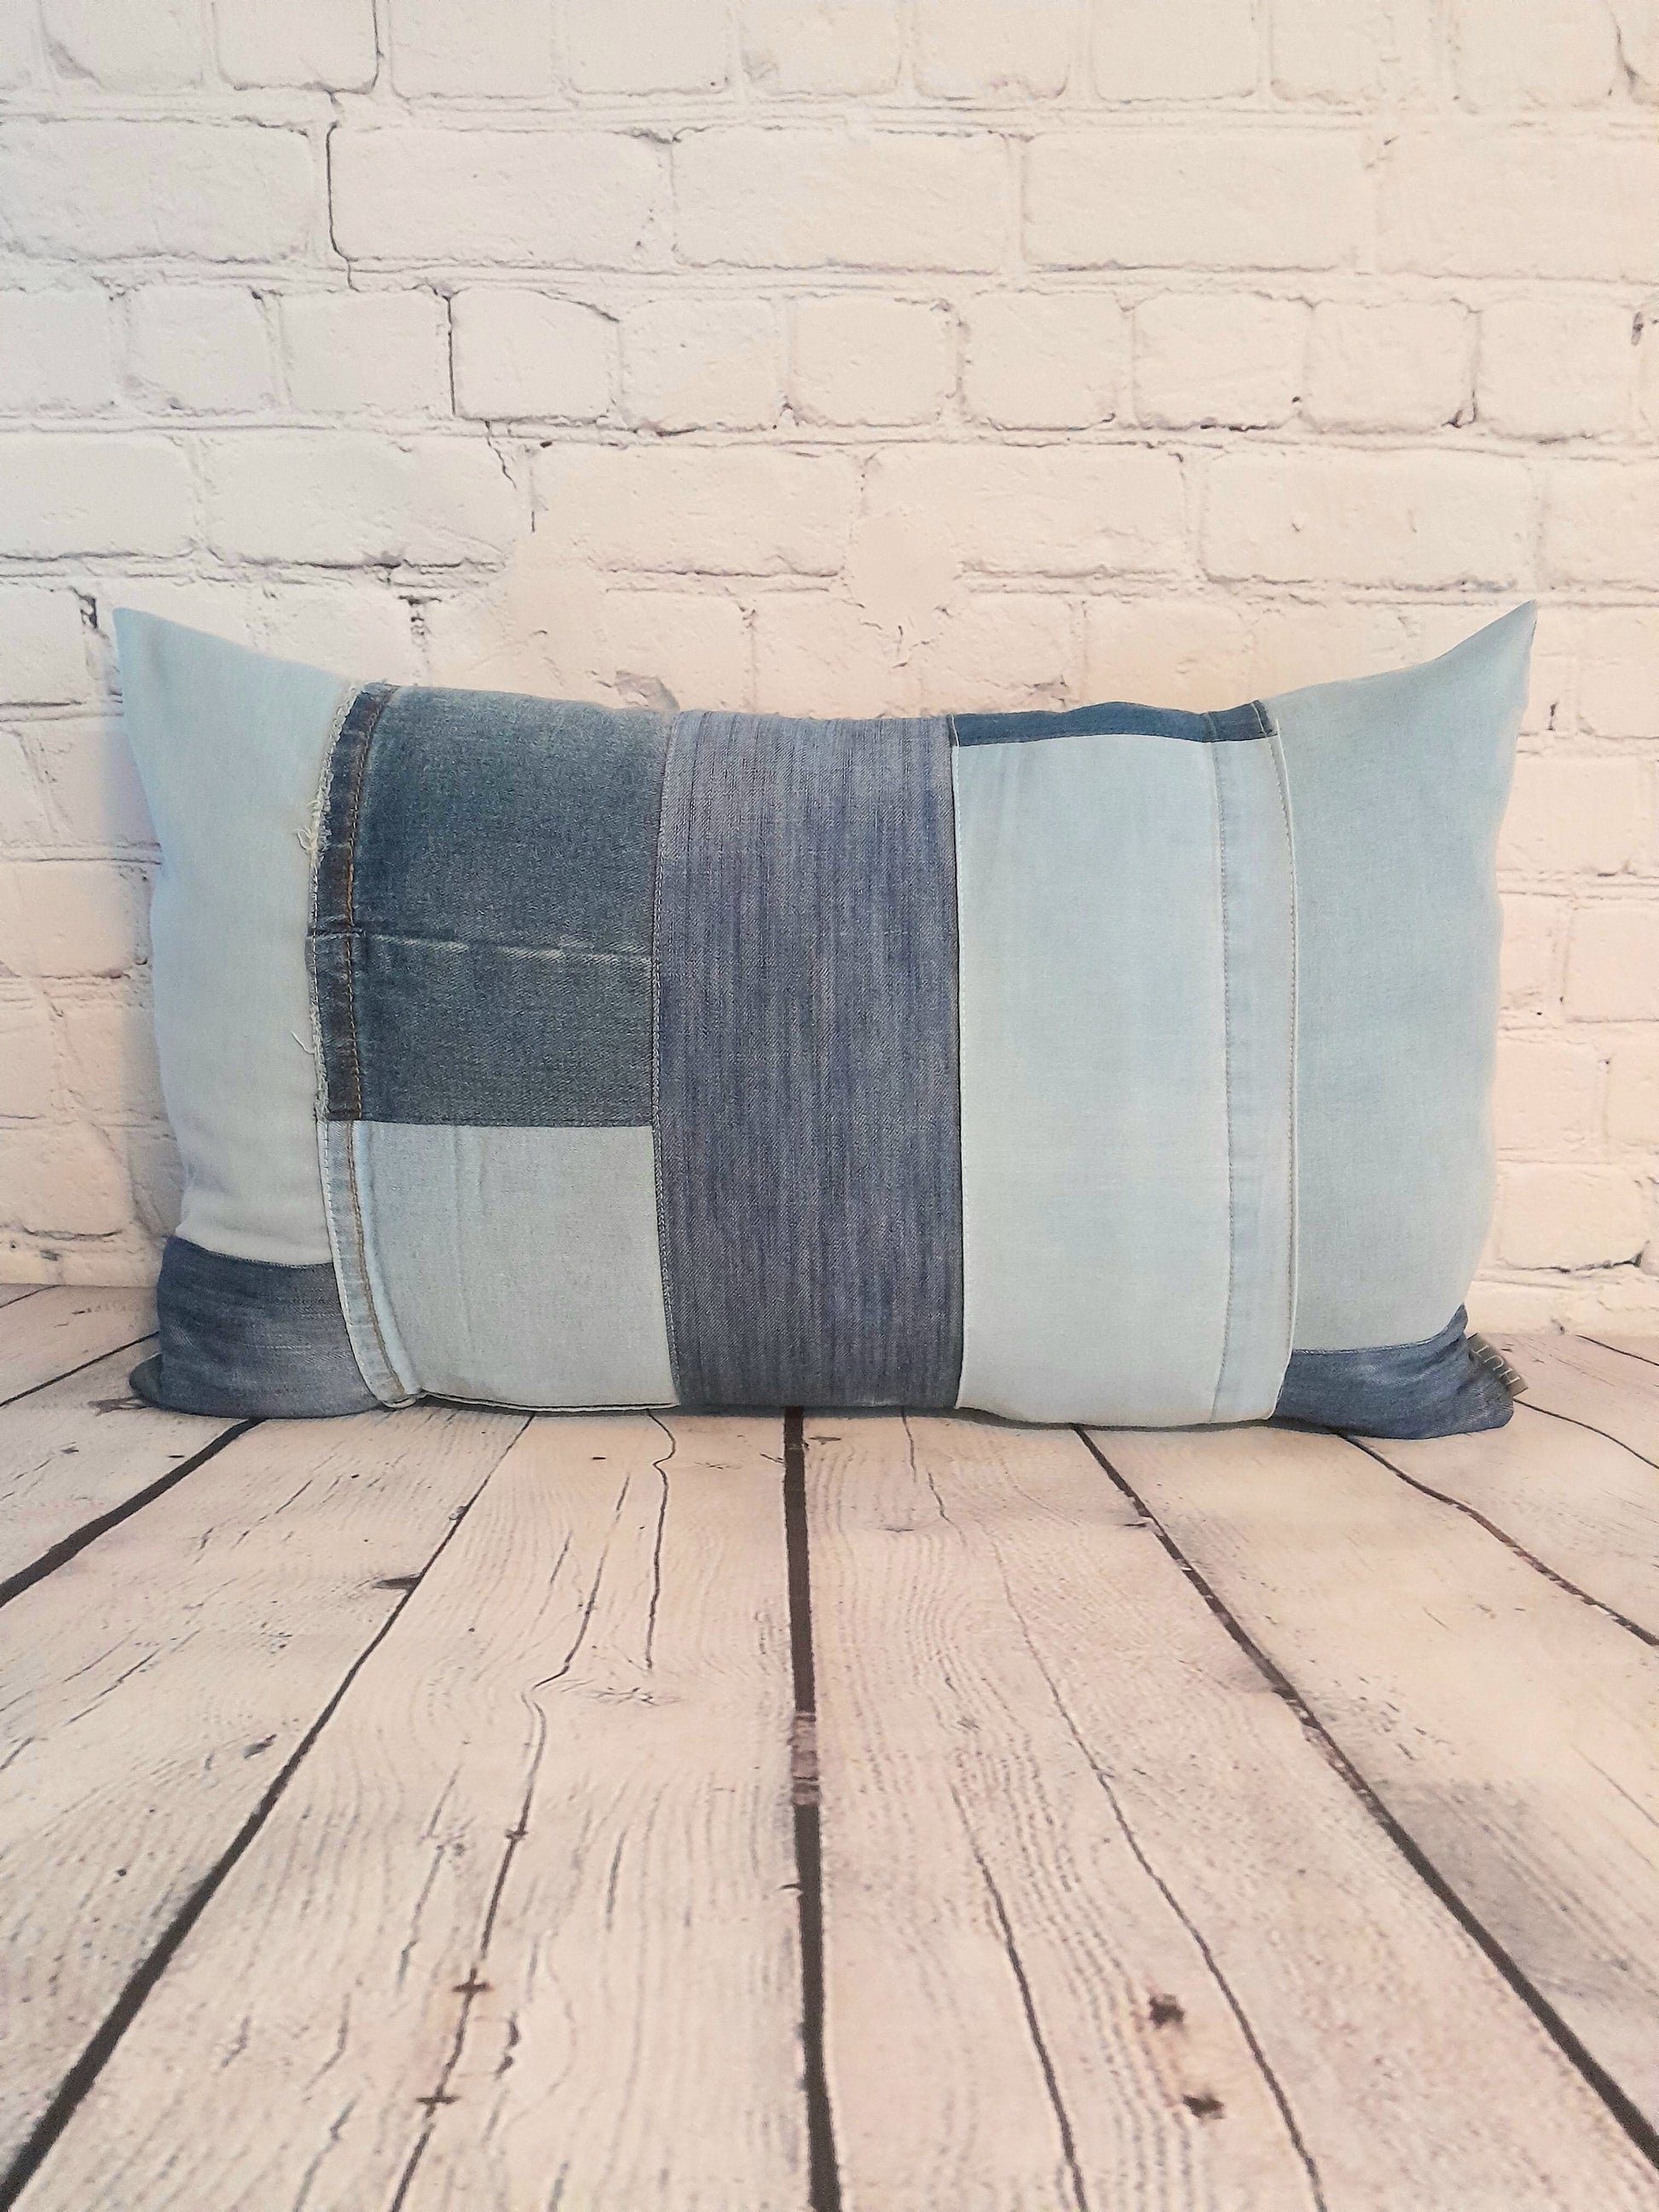 Pale denim cushion, patchwork throw pillow using upcycled denim.  Sustainable interiors.